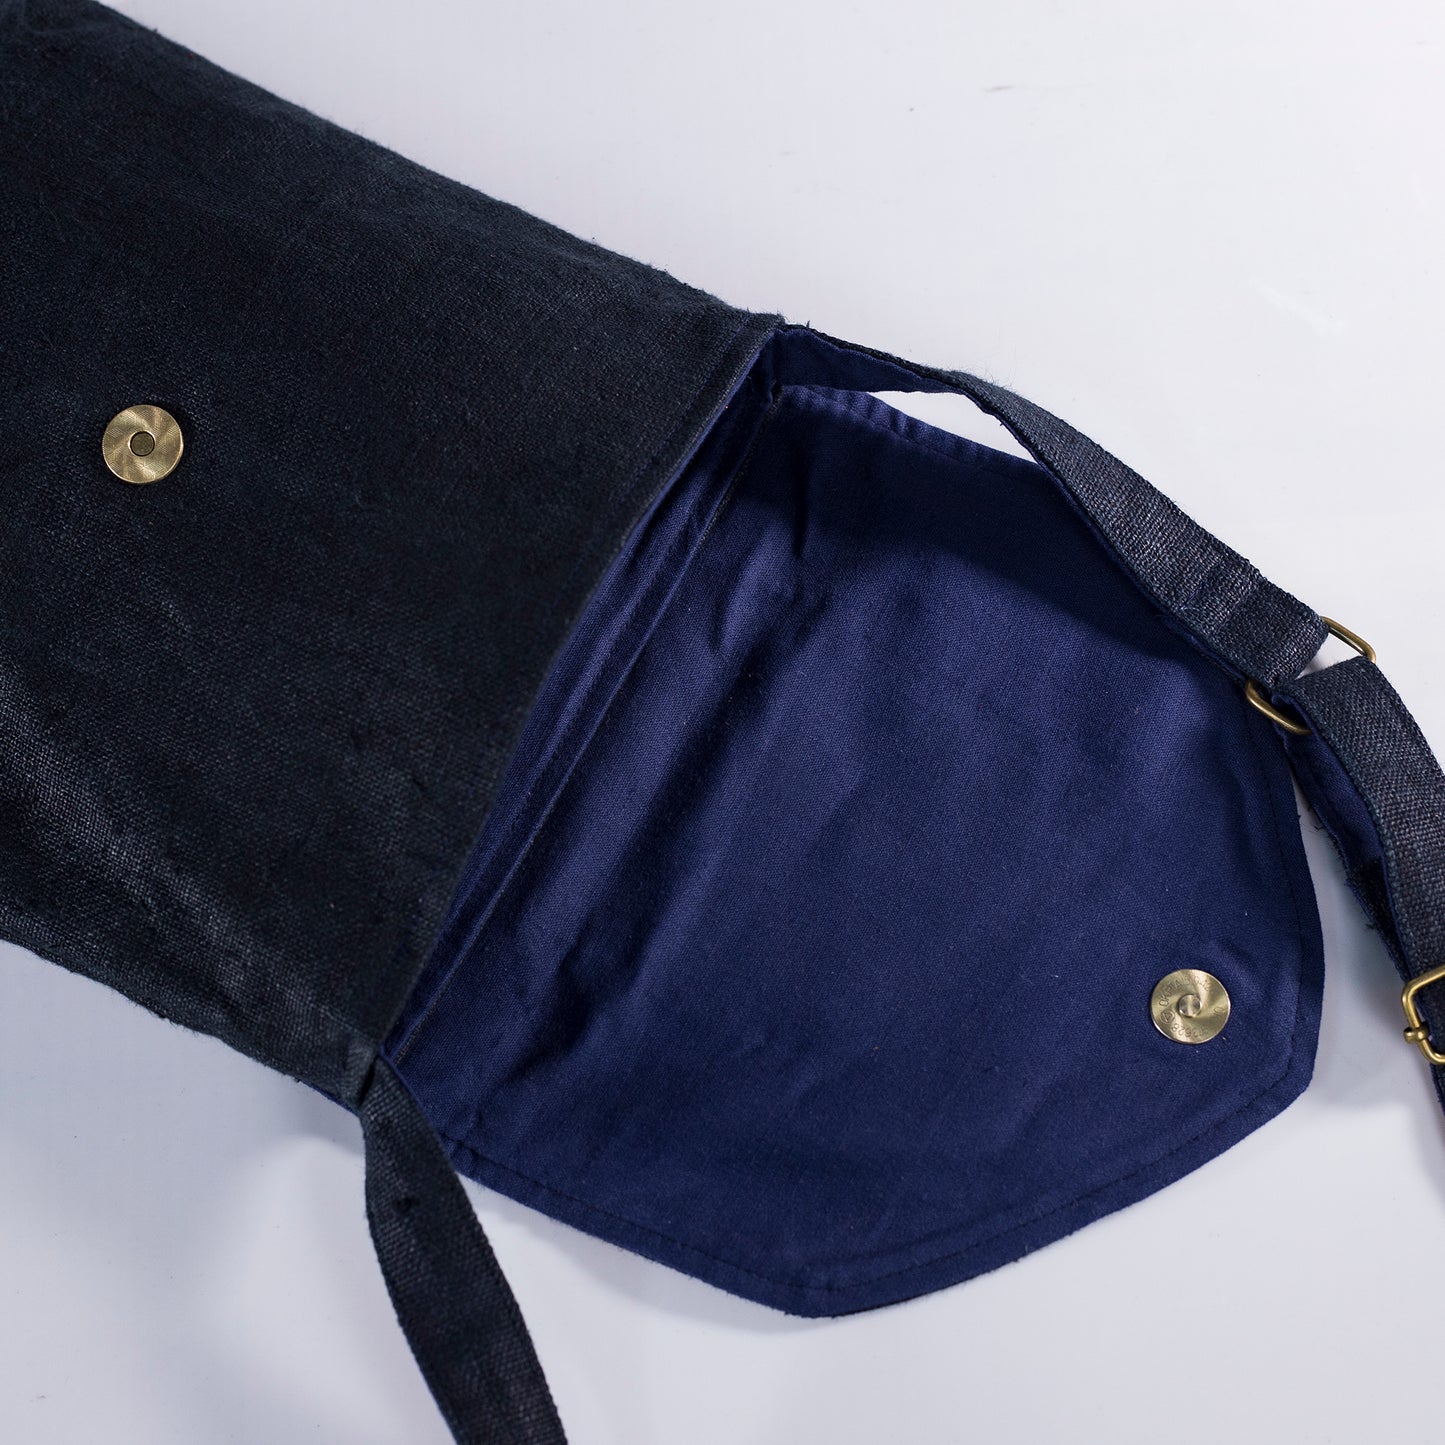 Purity Collection: Cross-body bag, natural hemp in BLACK with vintage patch